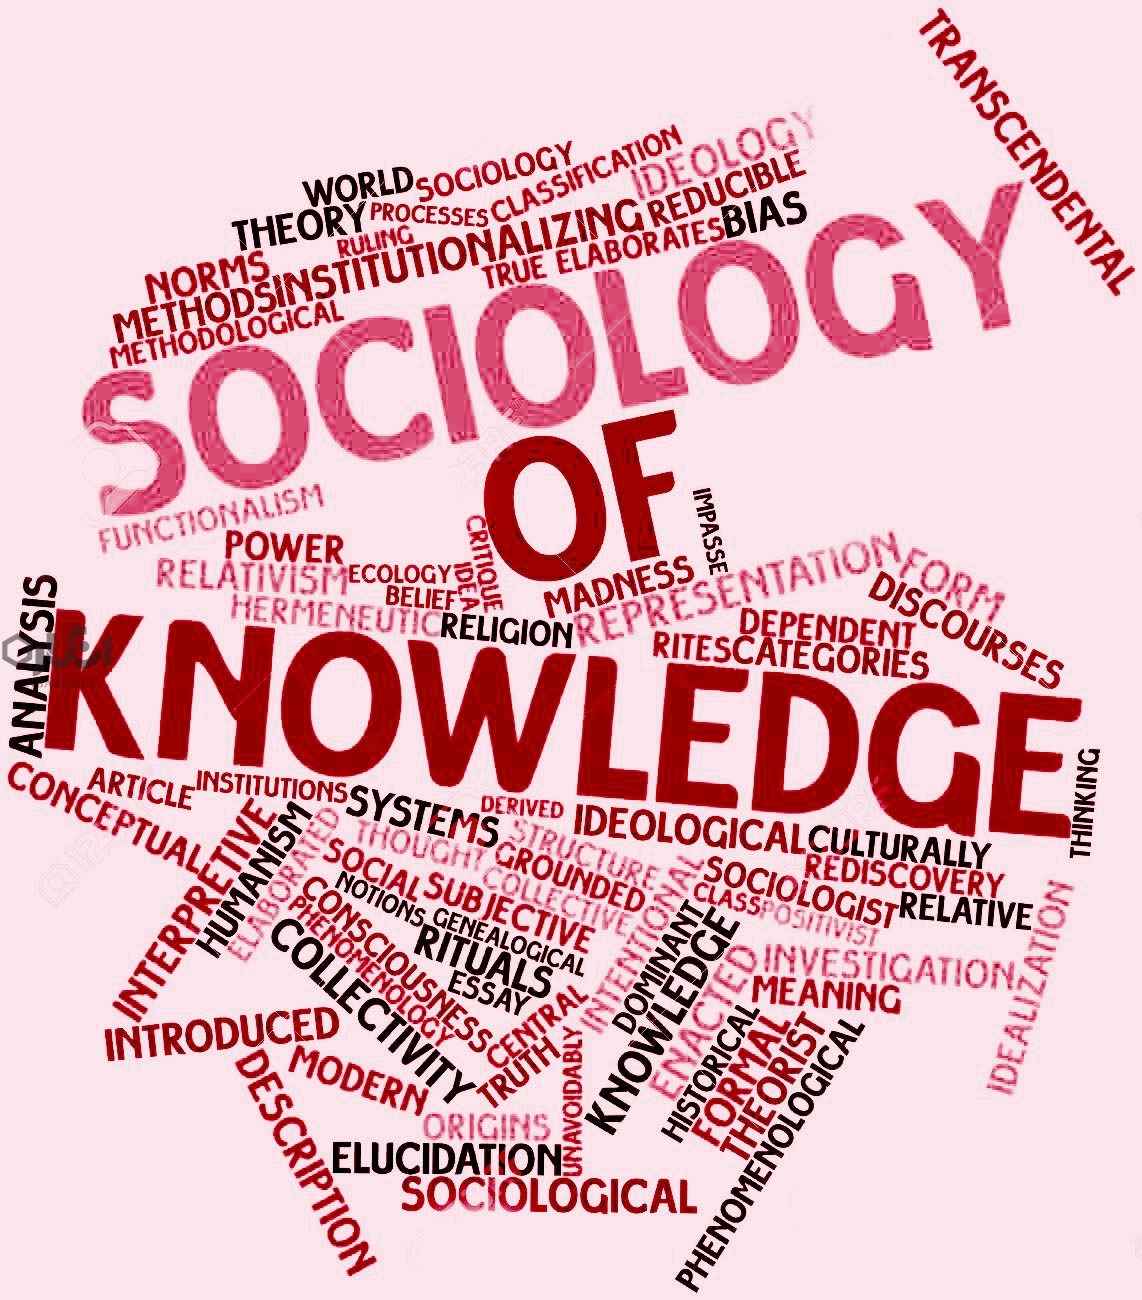 sociology of knowledge with related tags and terms